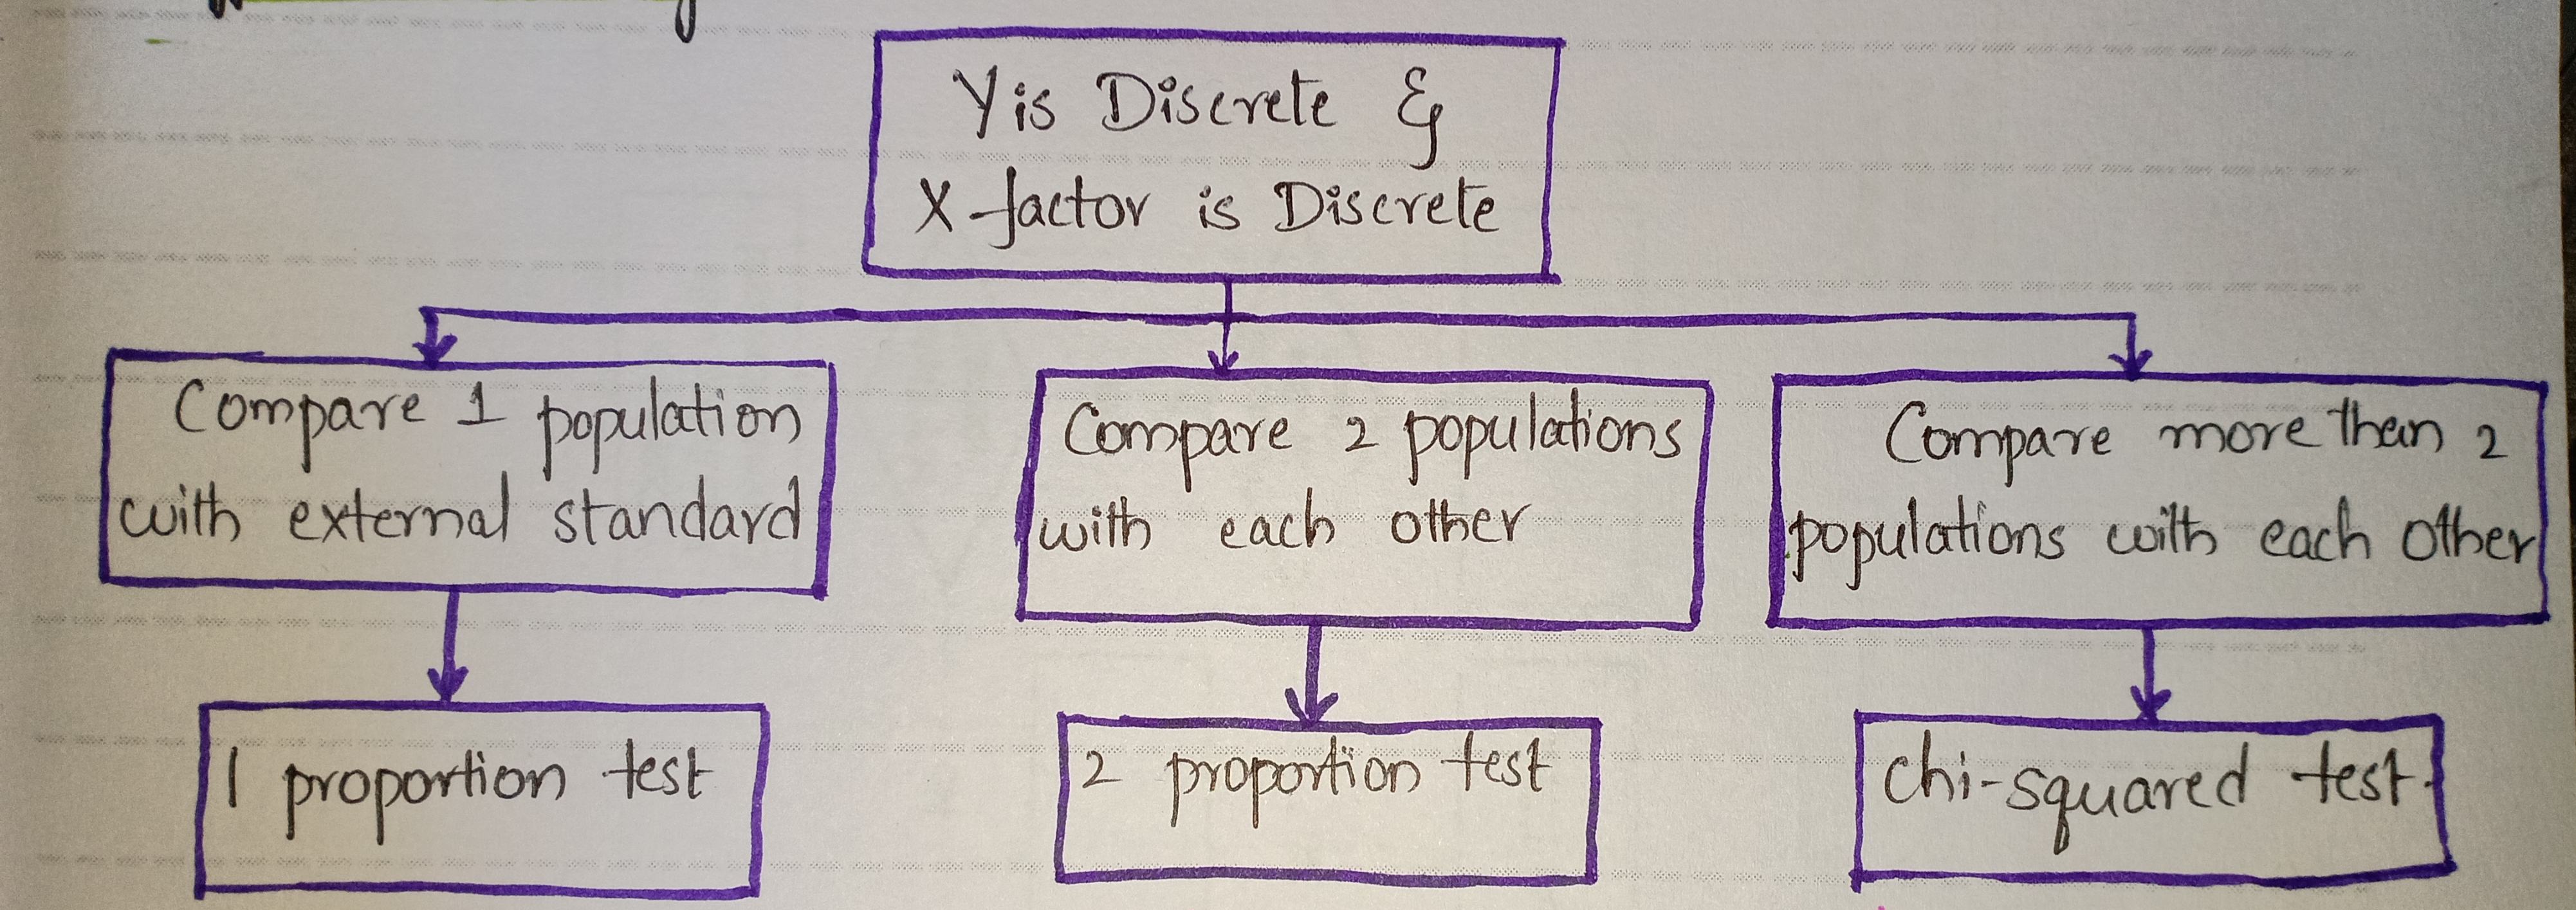 Hypothesis testing for discreate data